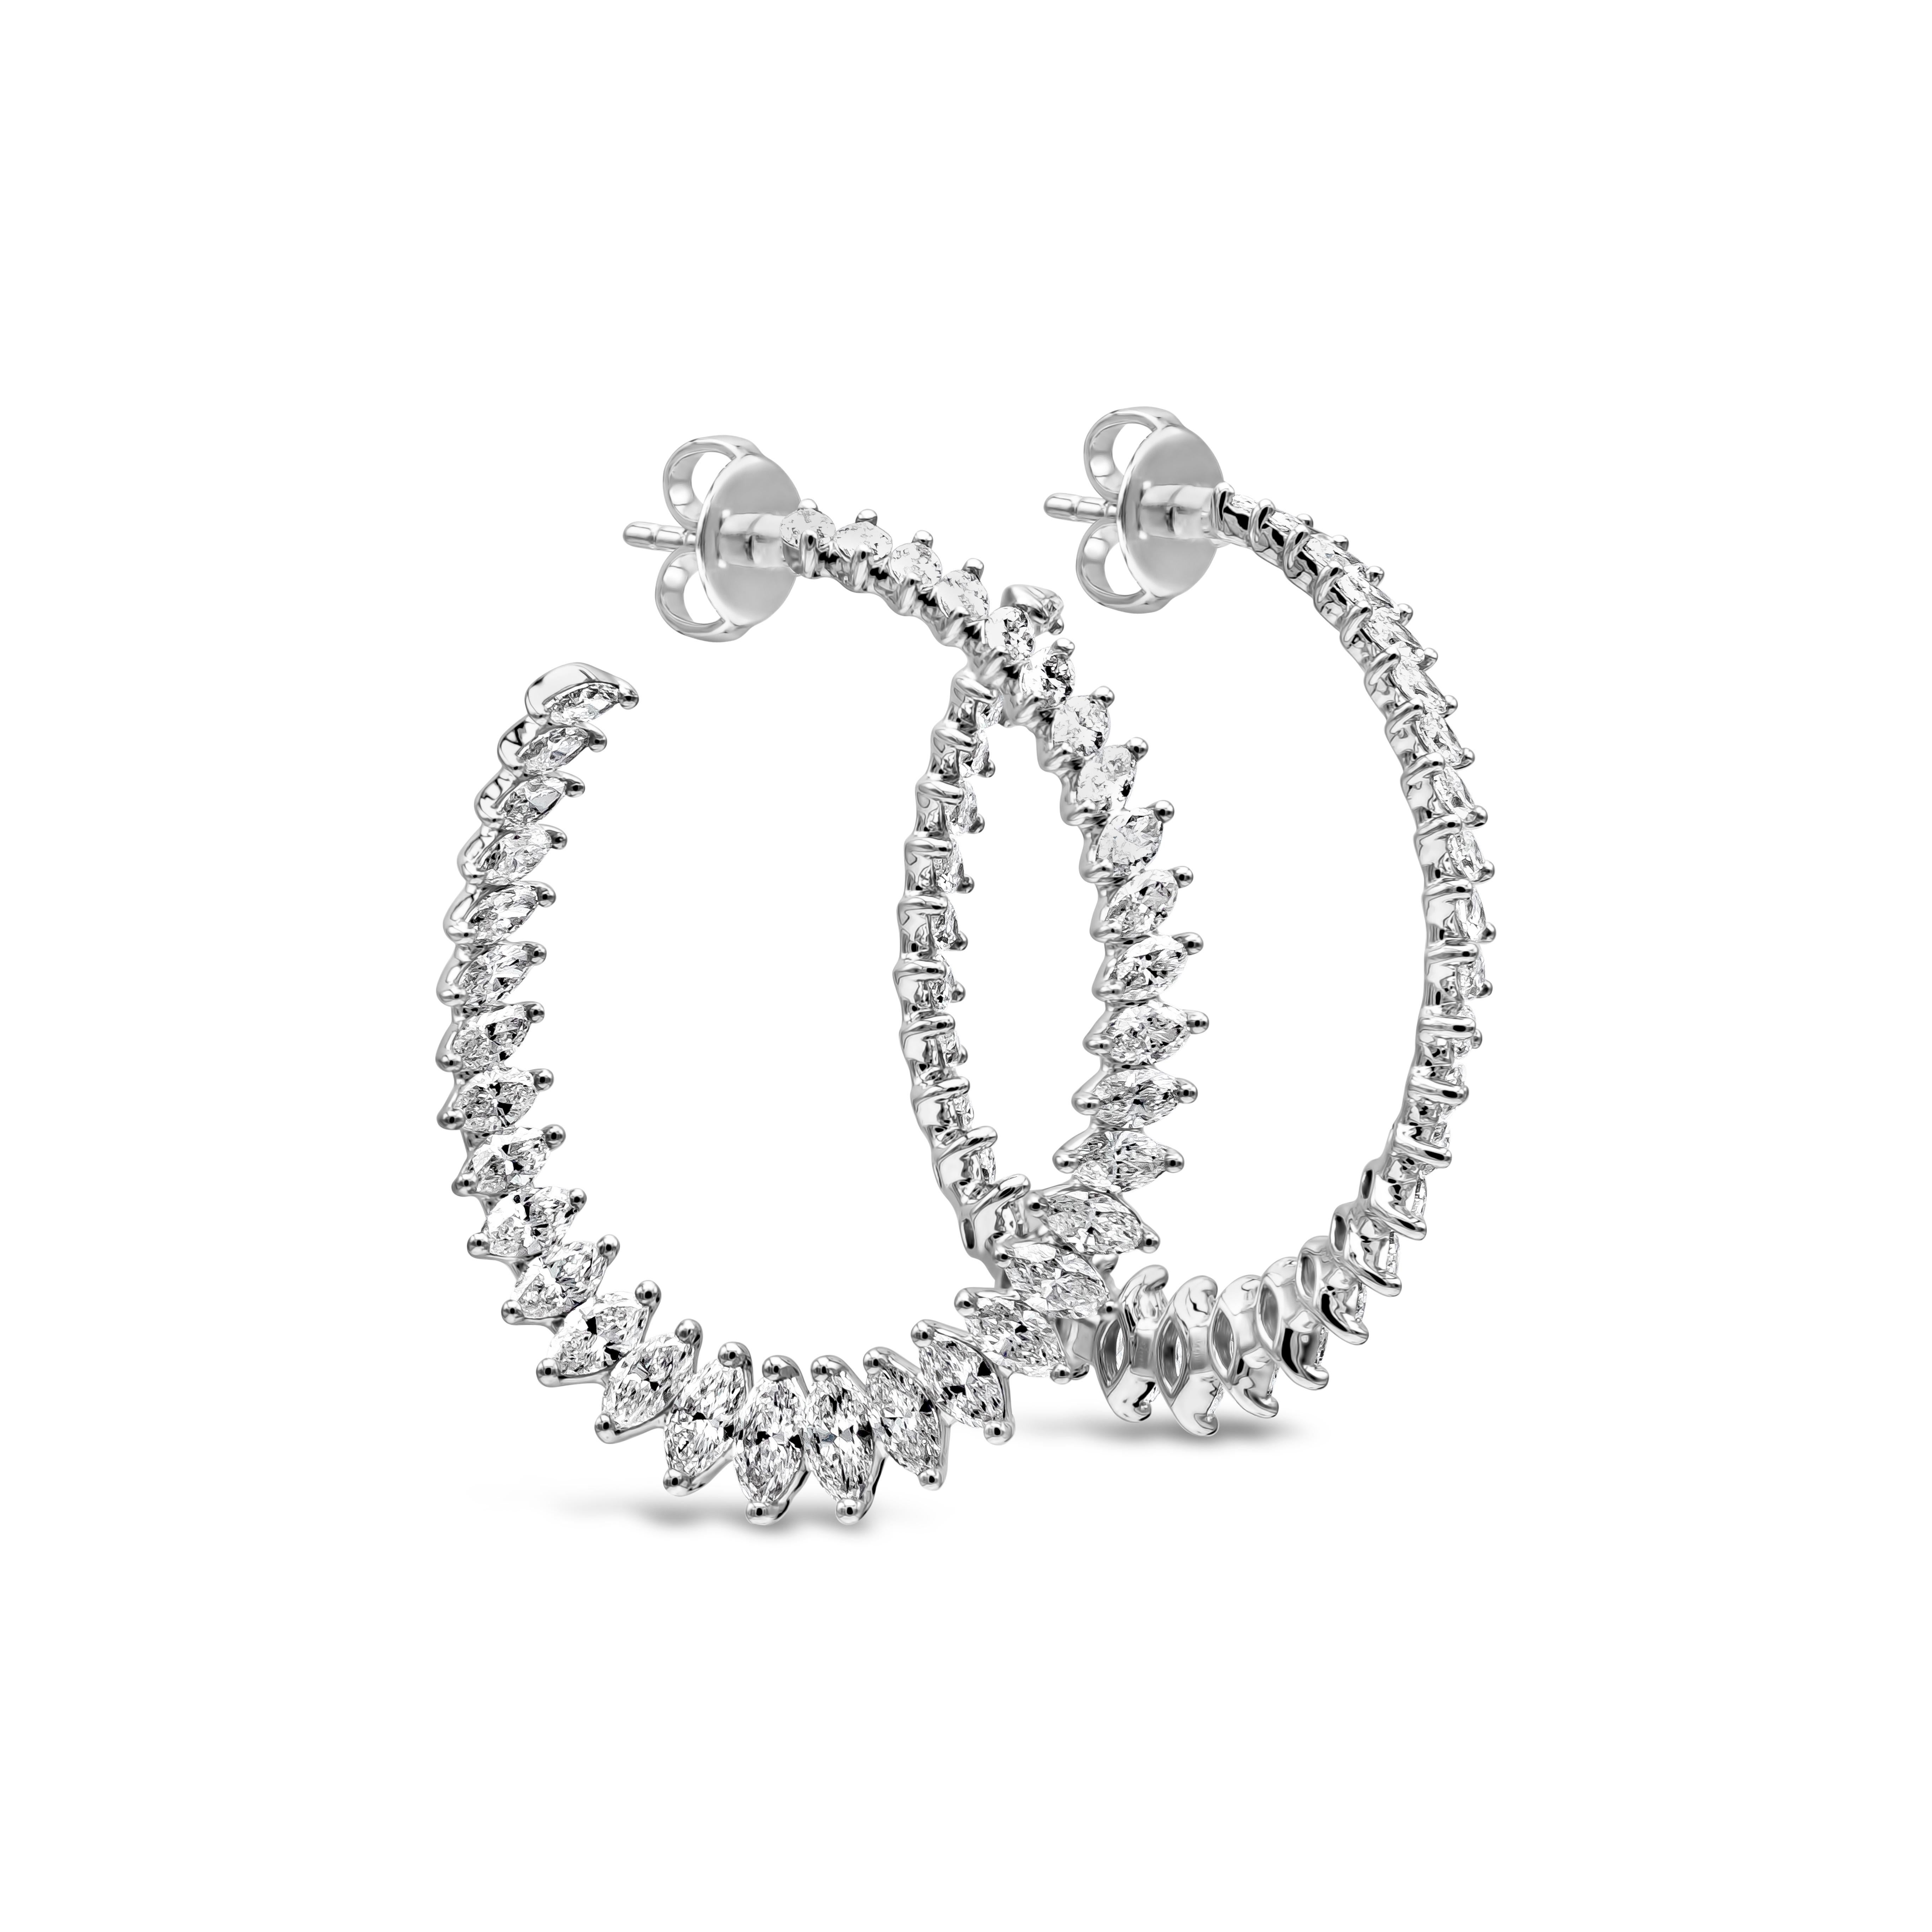 A unique and fashionable pair of hoop earrings showcasing a row of marquise cut diamonds forming a circular design. Marquise cut diamonds weigh 5.71 carats total. The length of this beautiful pair is 37mm while the width is 30mm. The weight is 10.21